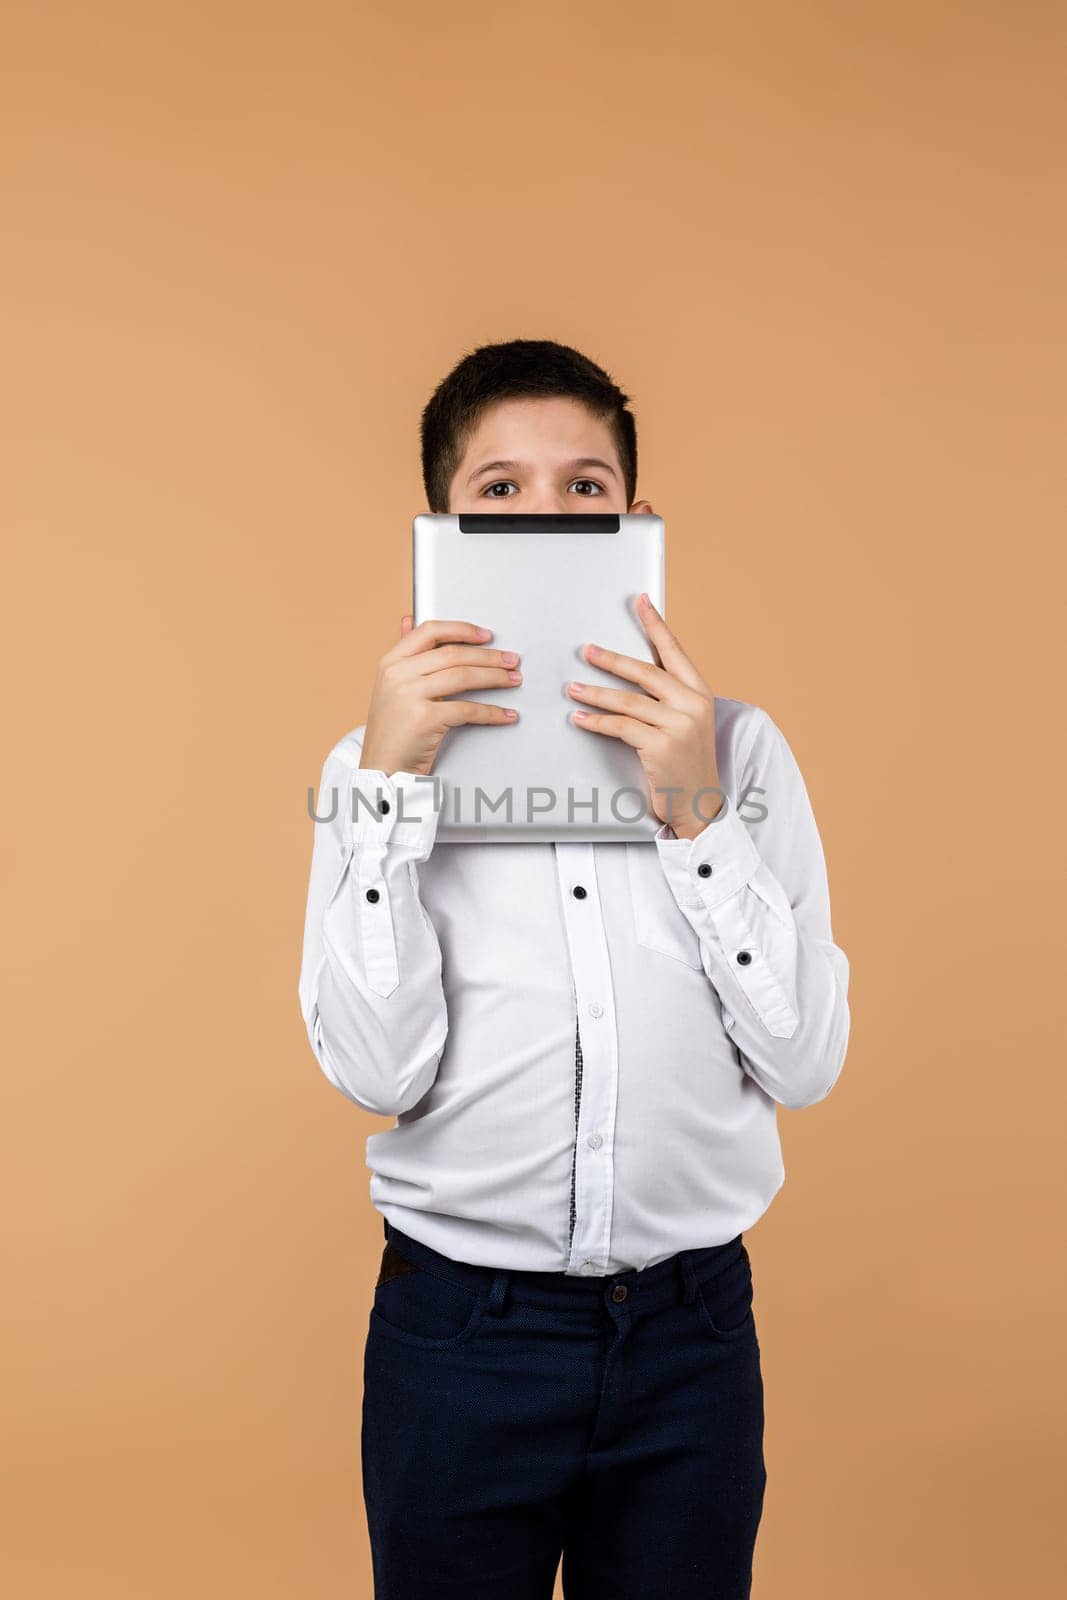 Emotional schoolboy holding digital tablet in front of his face. the child is afraid of the real world and lives in a virtual world